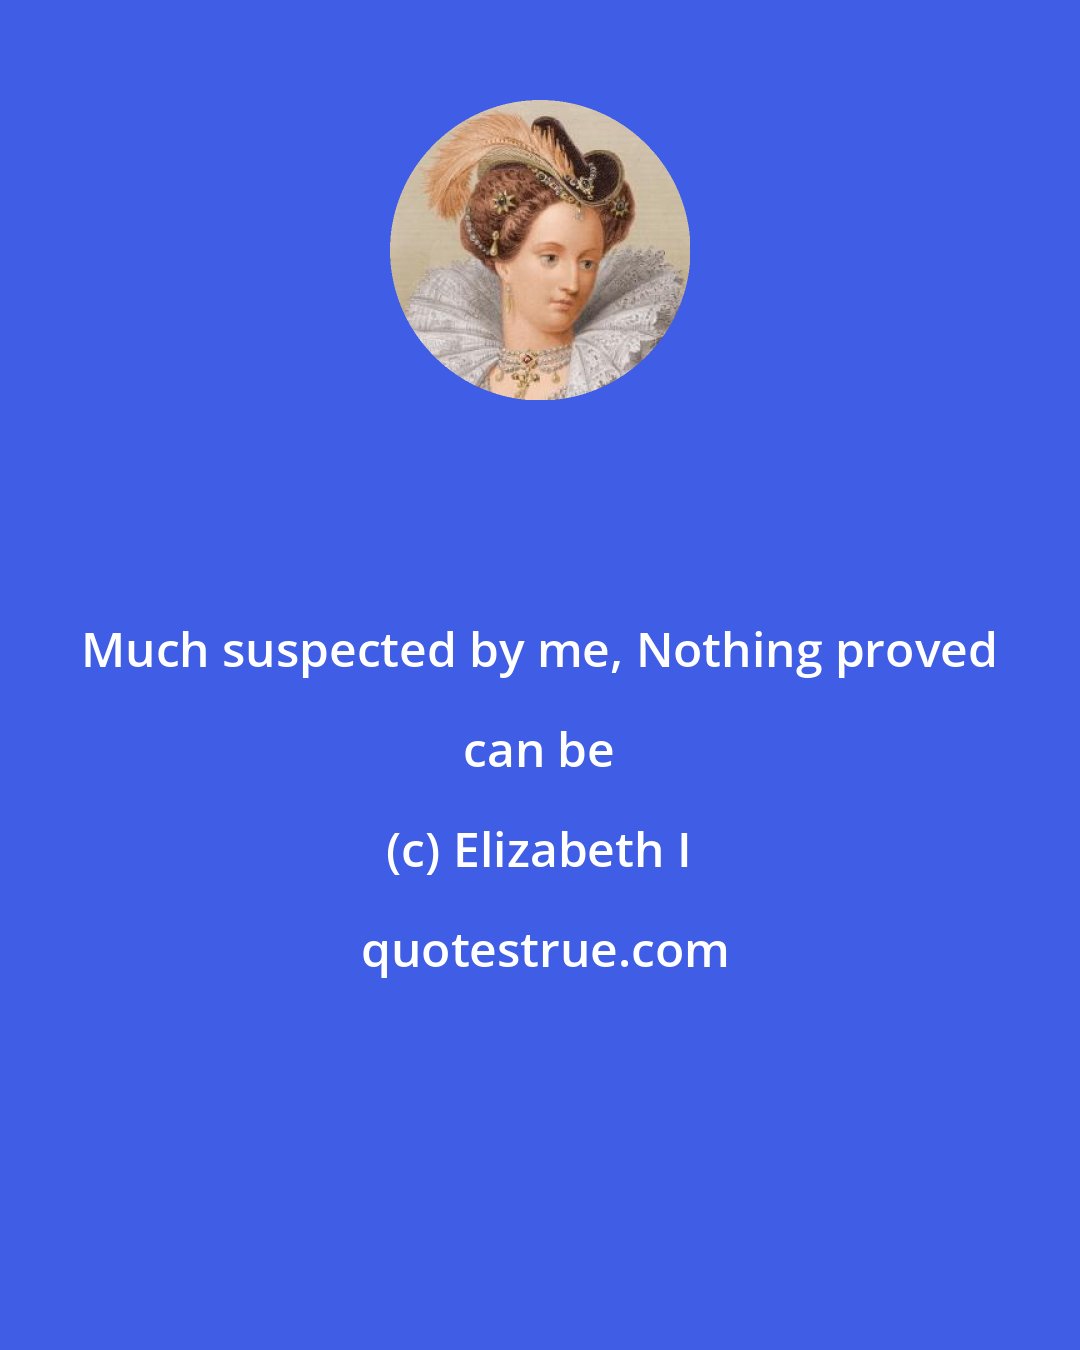 Elizabeth I: Much suspected by me, Nothing proved can be